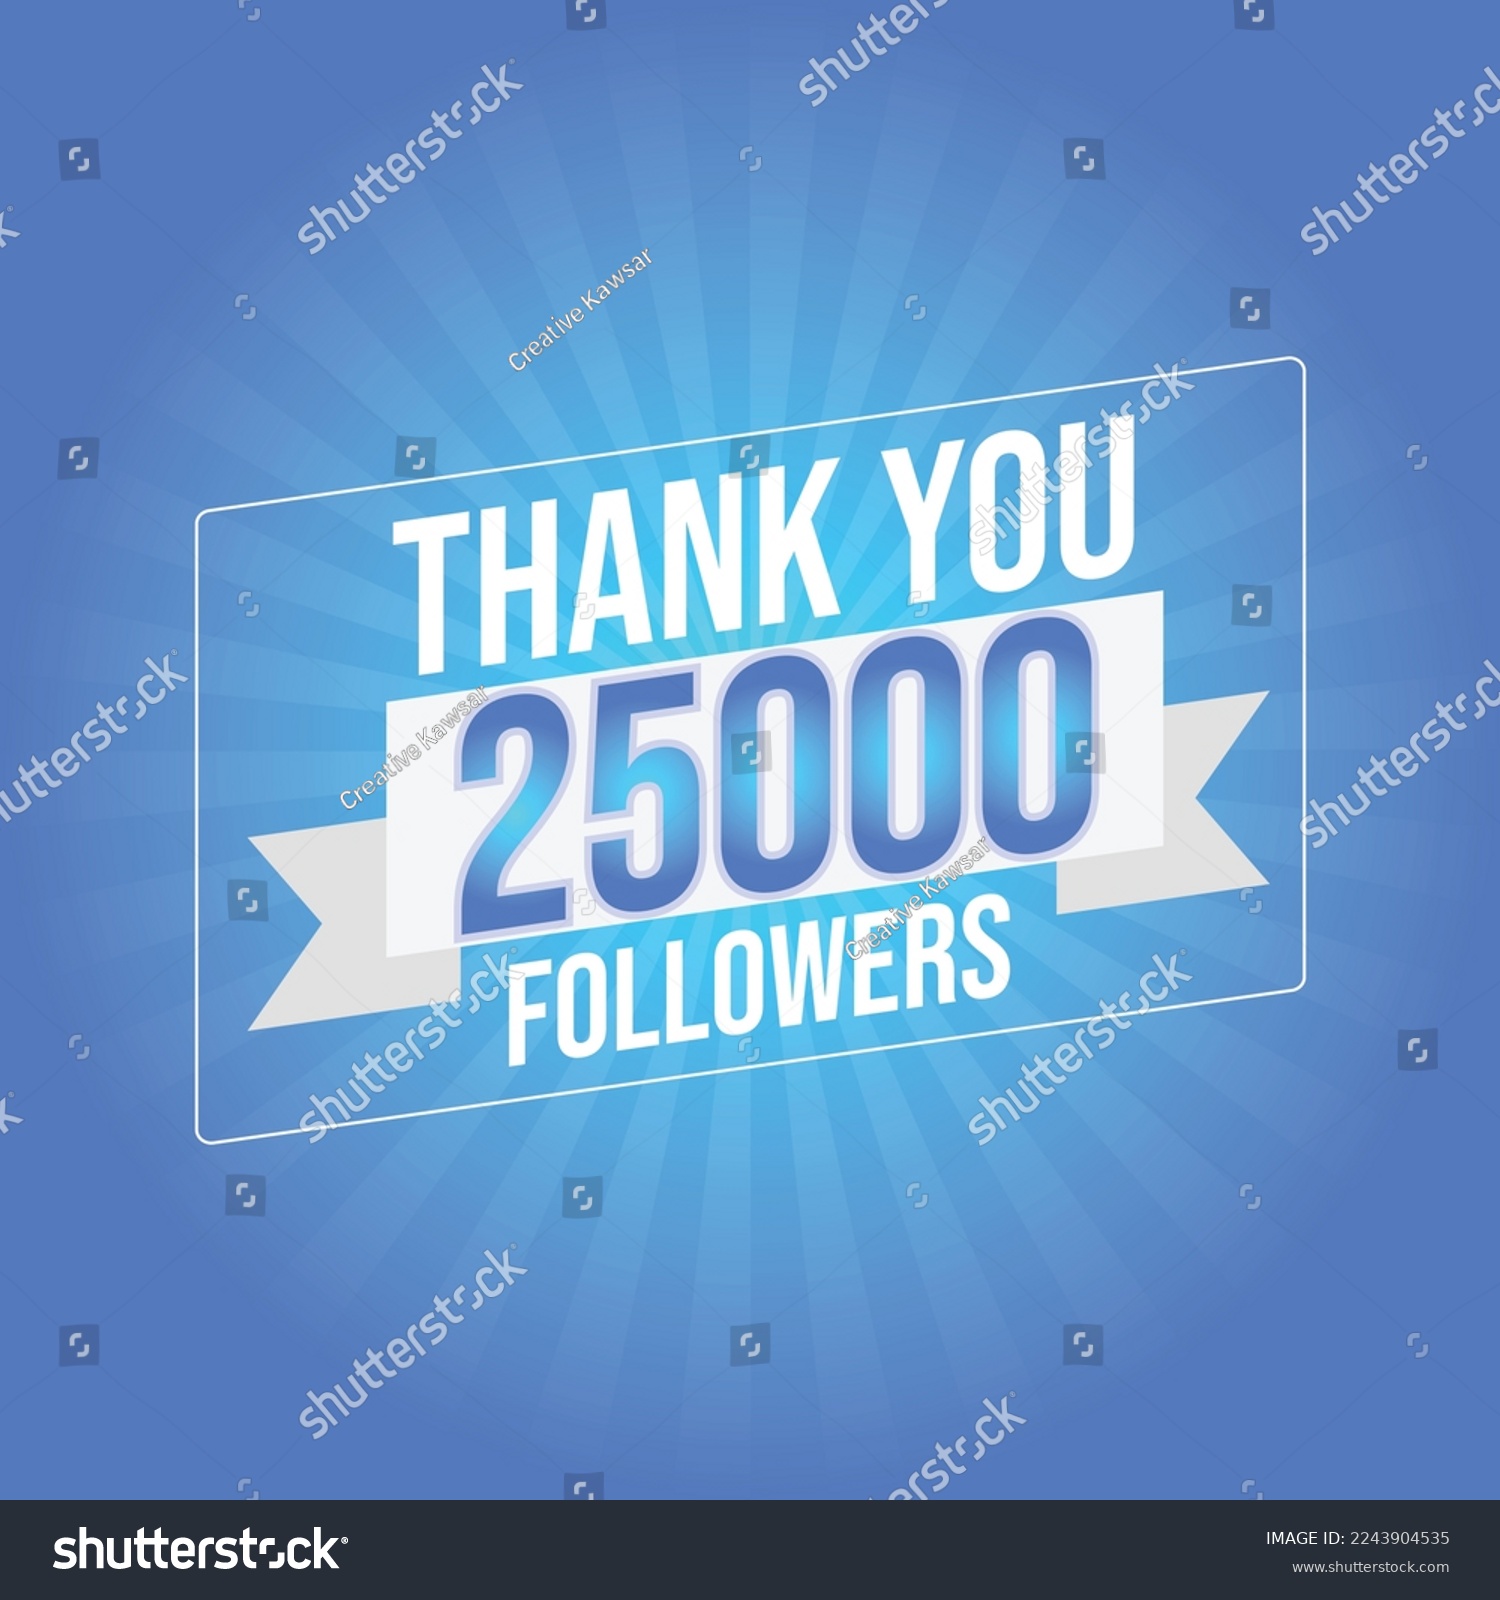 SVG of Thank you template for social media 25k followers, subscribers, like. 25000 followers svg